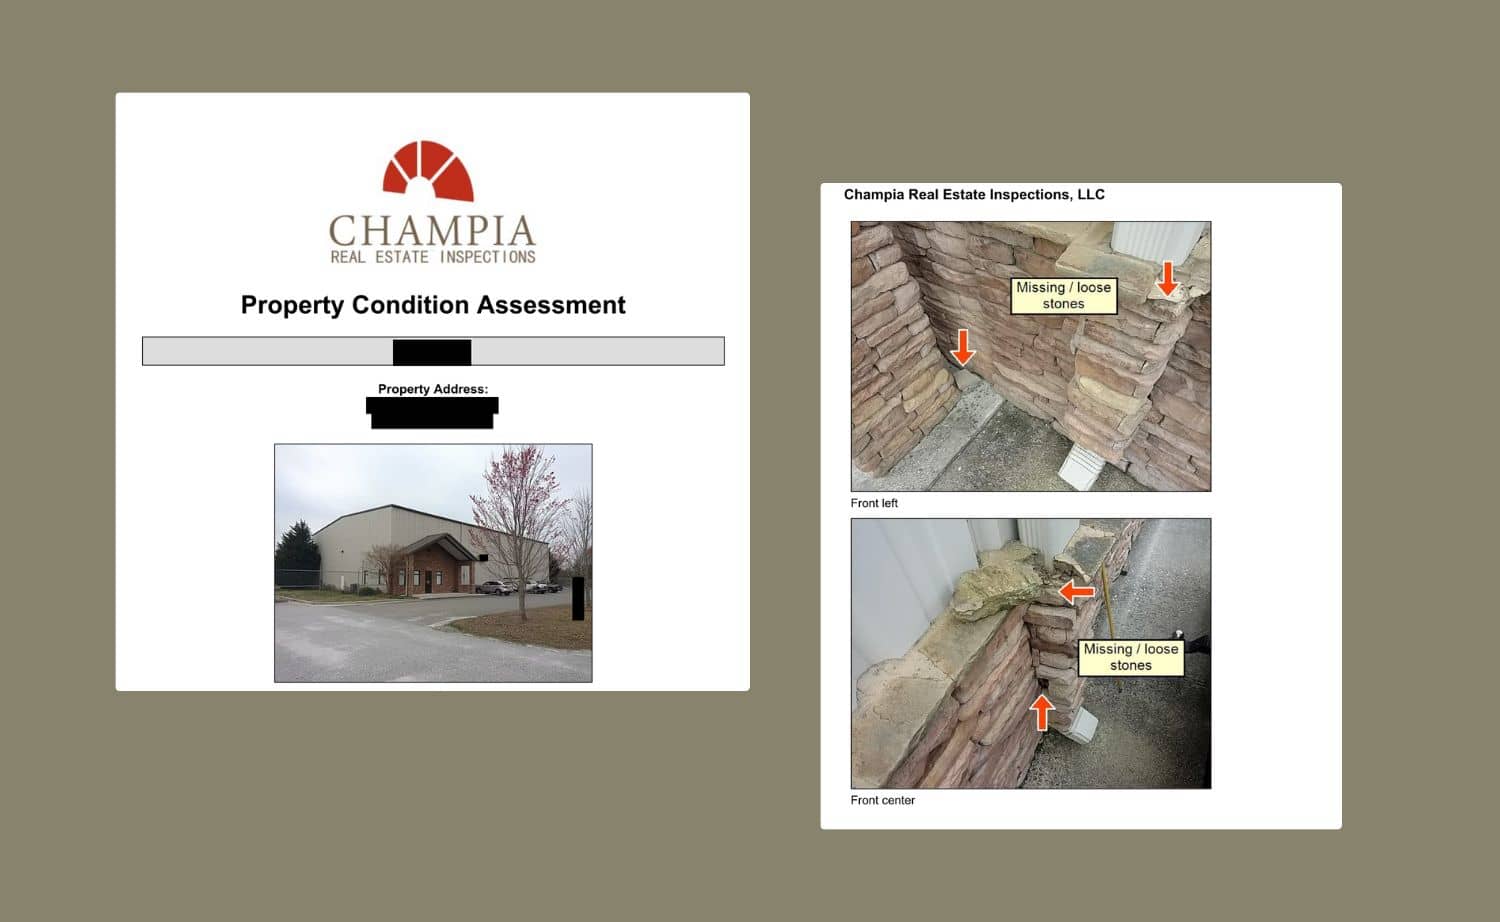 Sample home inspection report from champia, showing no pass or fail grade.